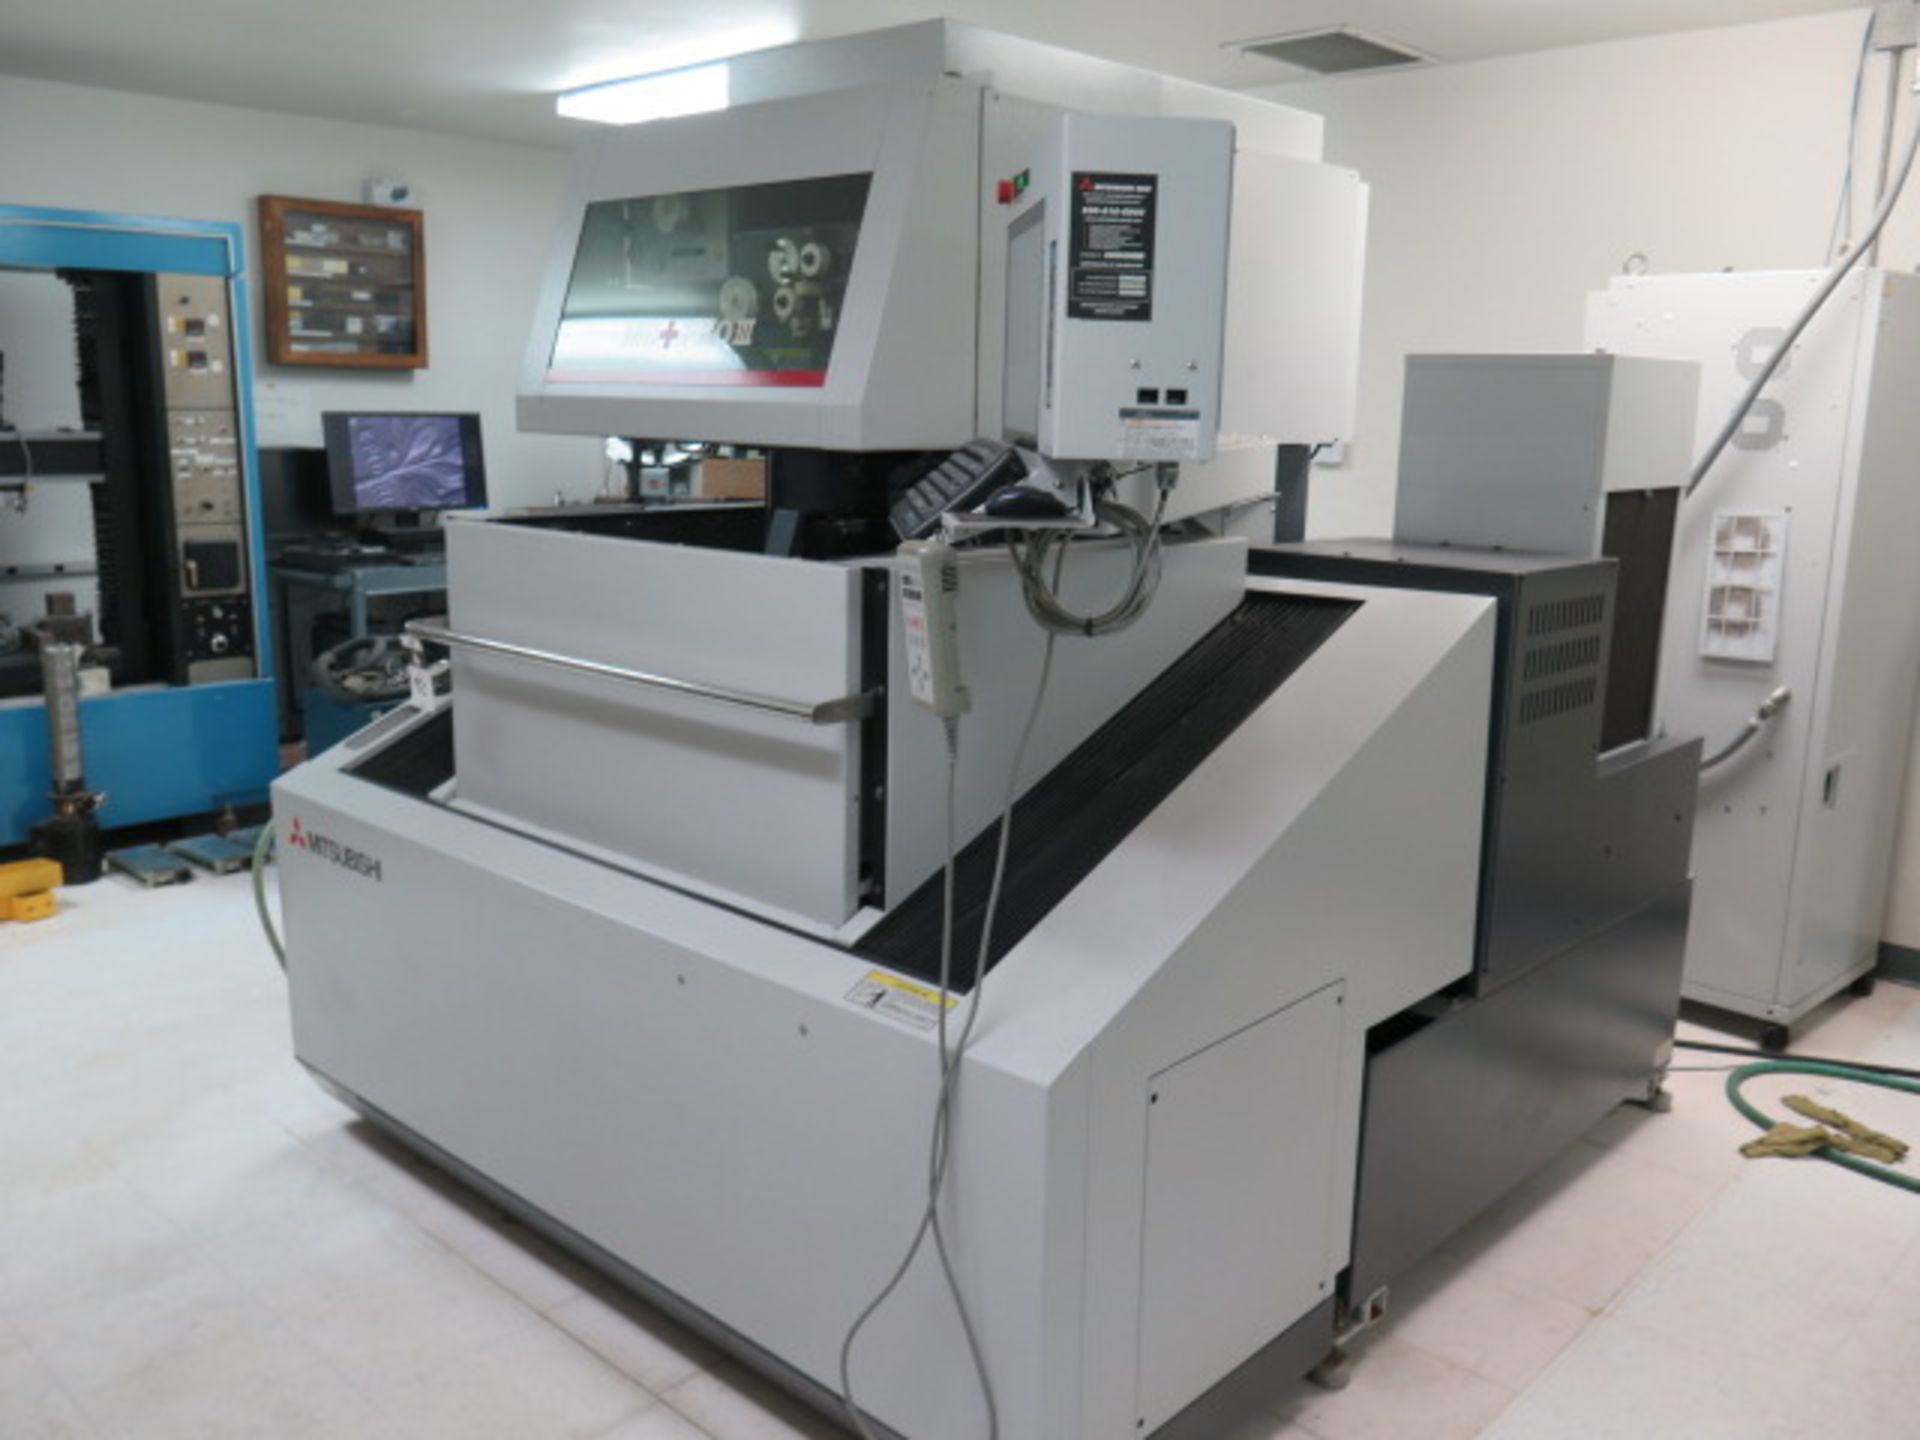 2013 Mitsubishi MD+ PRO III mdl. MV1200S CNC Wire EDM s/n 53DM1687 w/ Mitsubishi M700, SOLD AS IS - Image 2 of 23